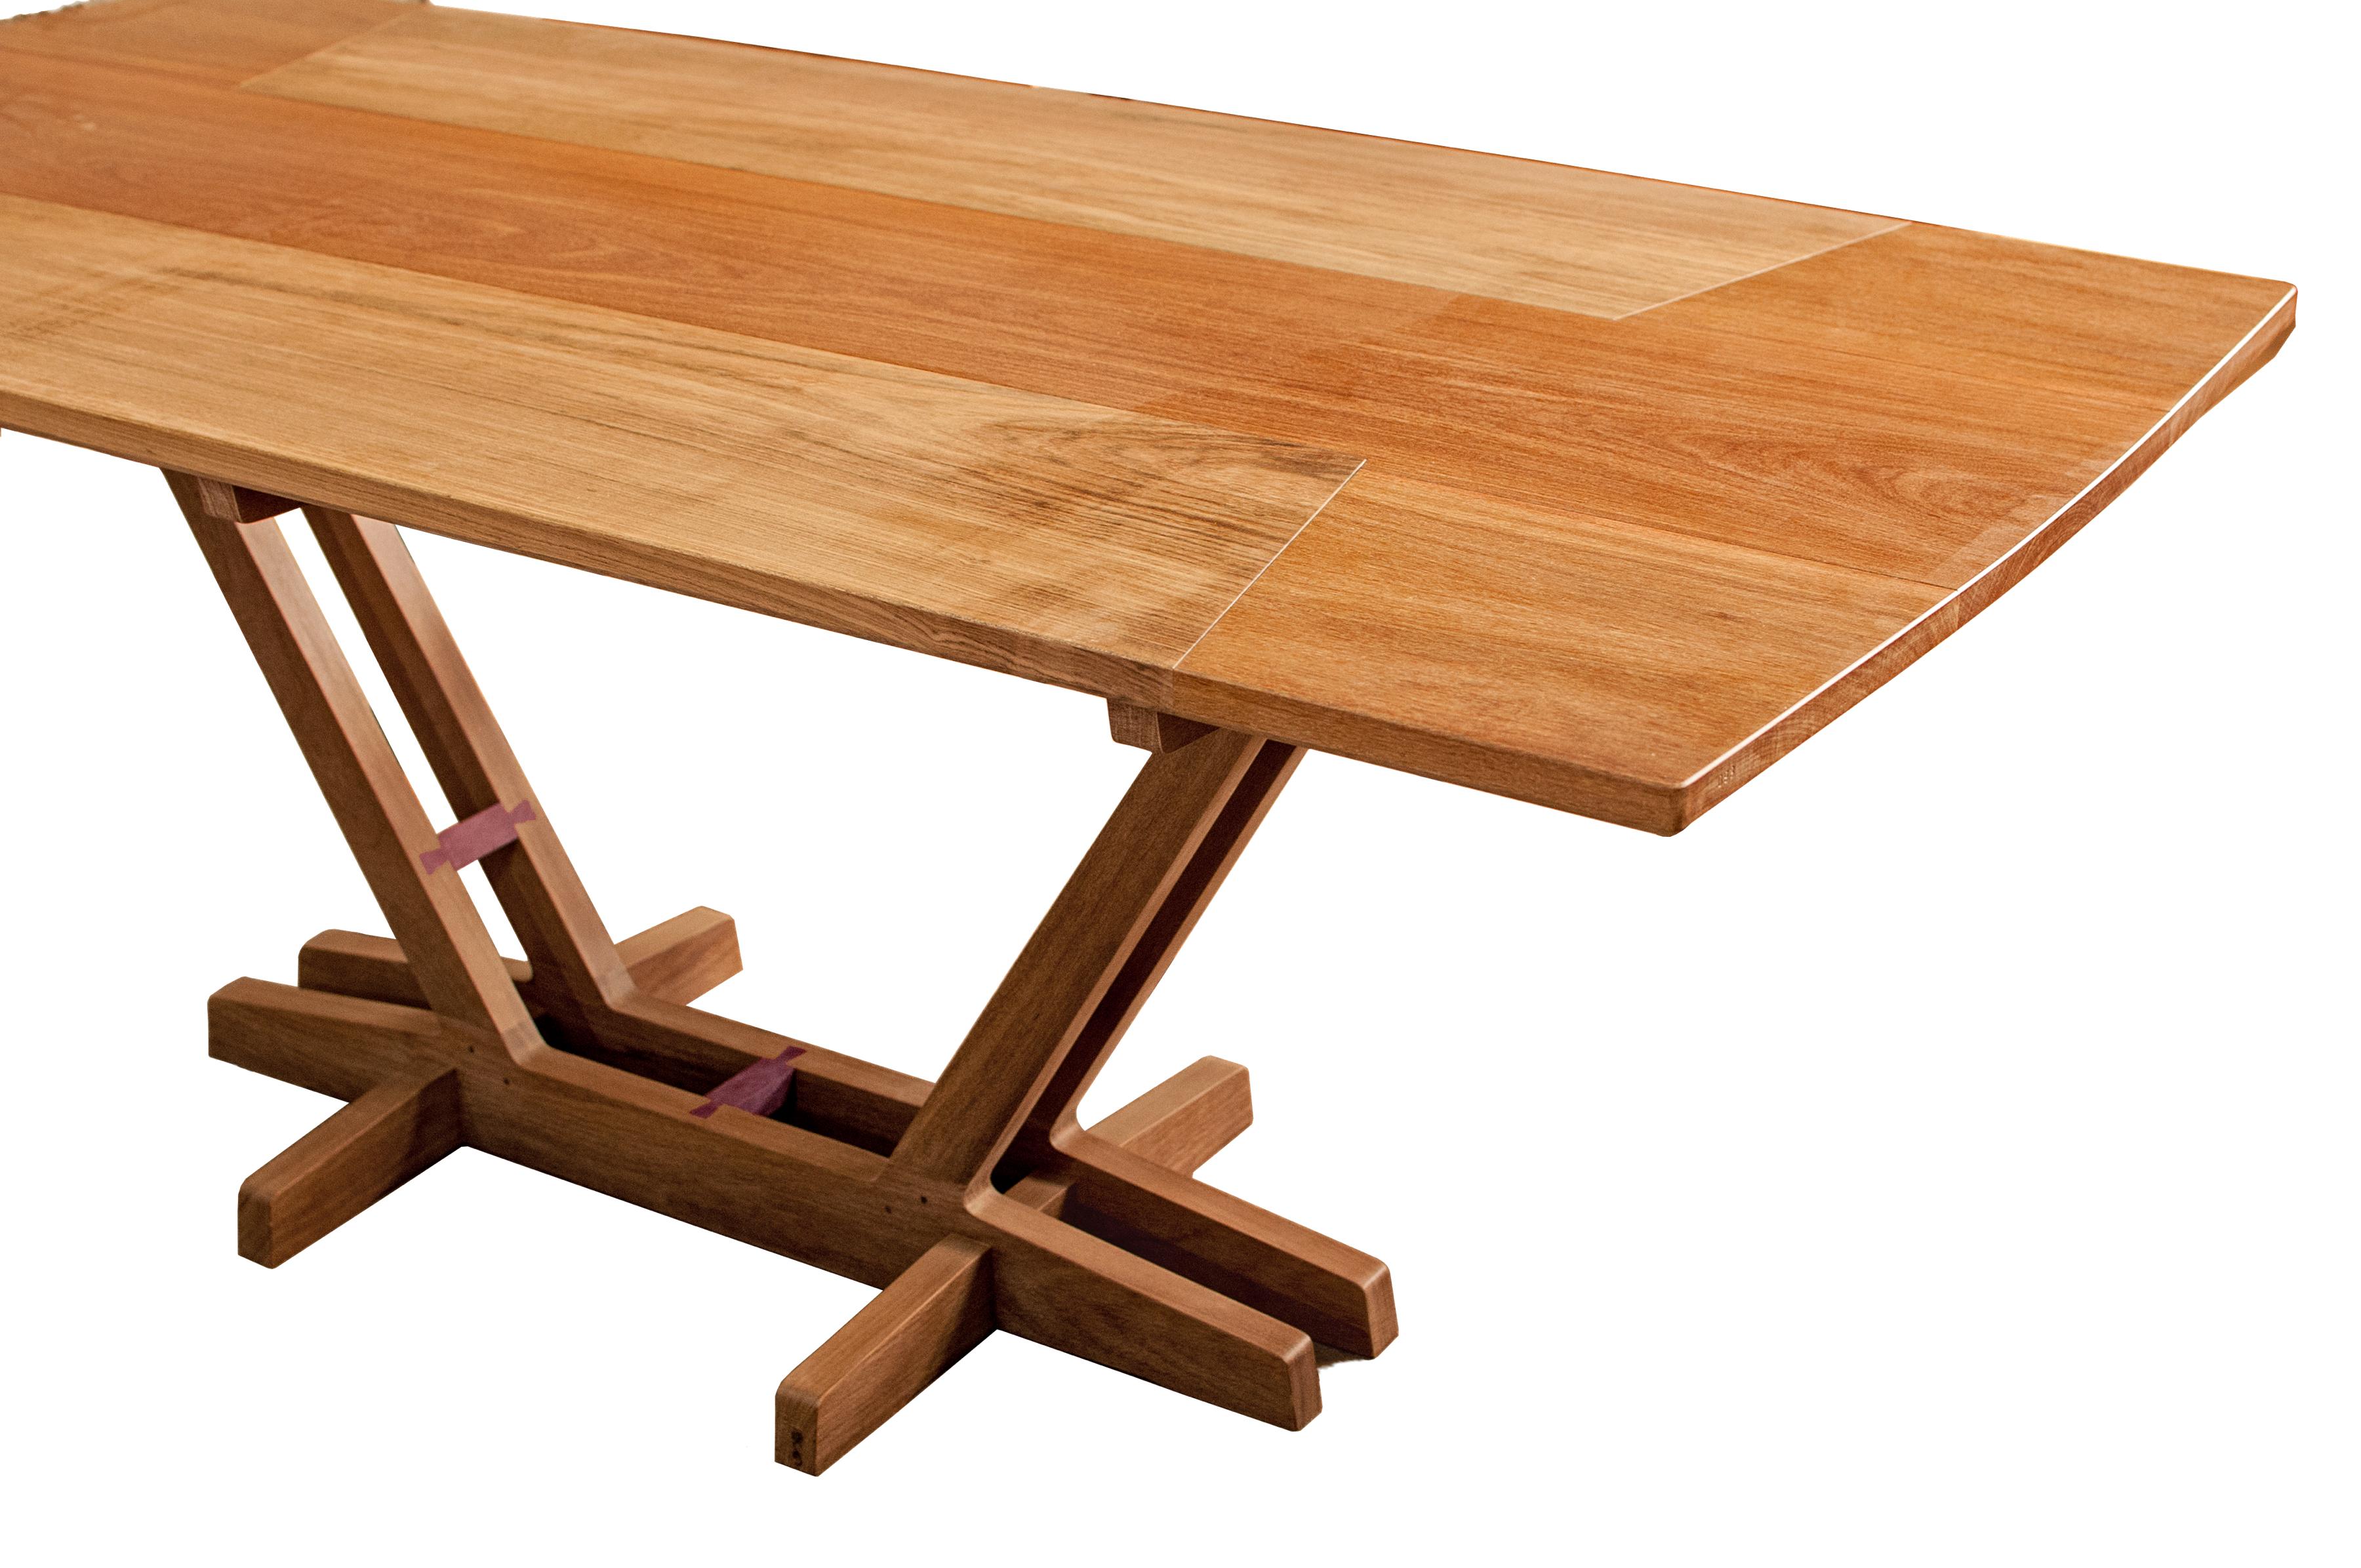 Dining table made with select tropical Brazilian hardwood by Ricardo Graham Ferreira.

Solid table top and base composed by two wood species assembled with traditional wood joints.

This dining table can be custom-made to fit specific dimensions.